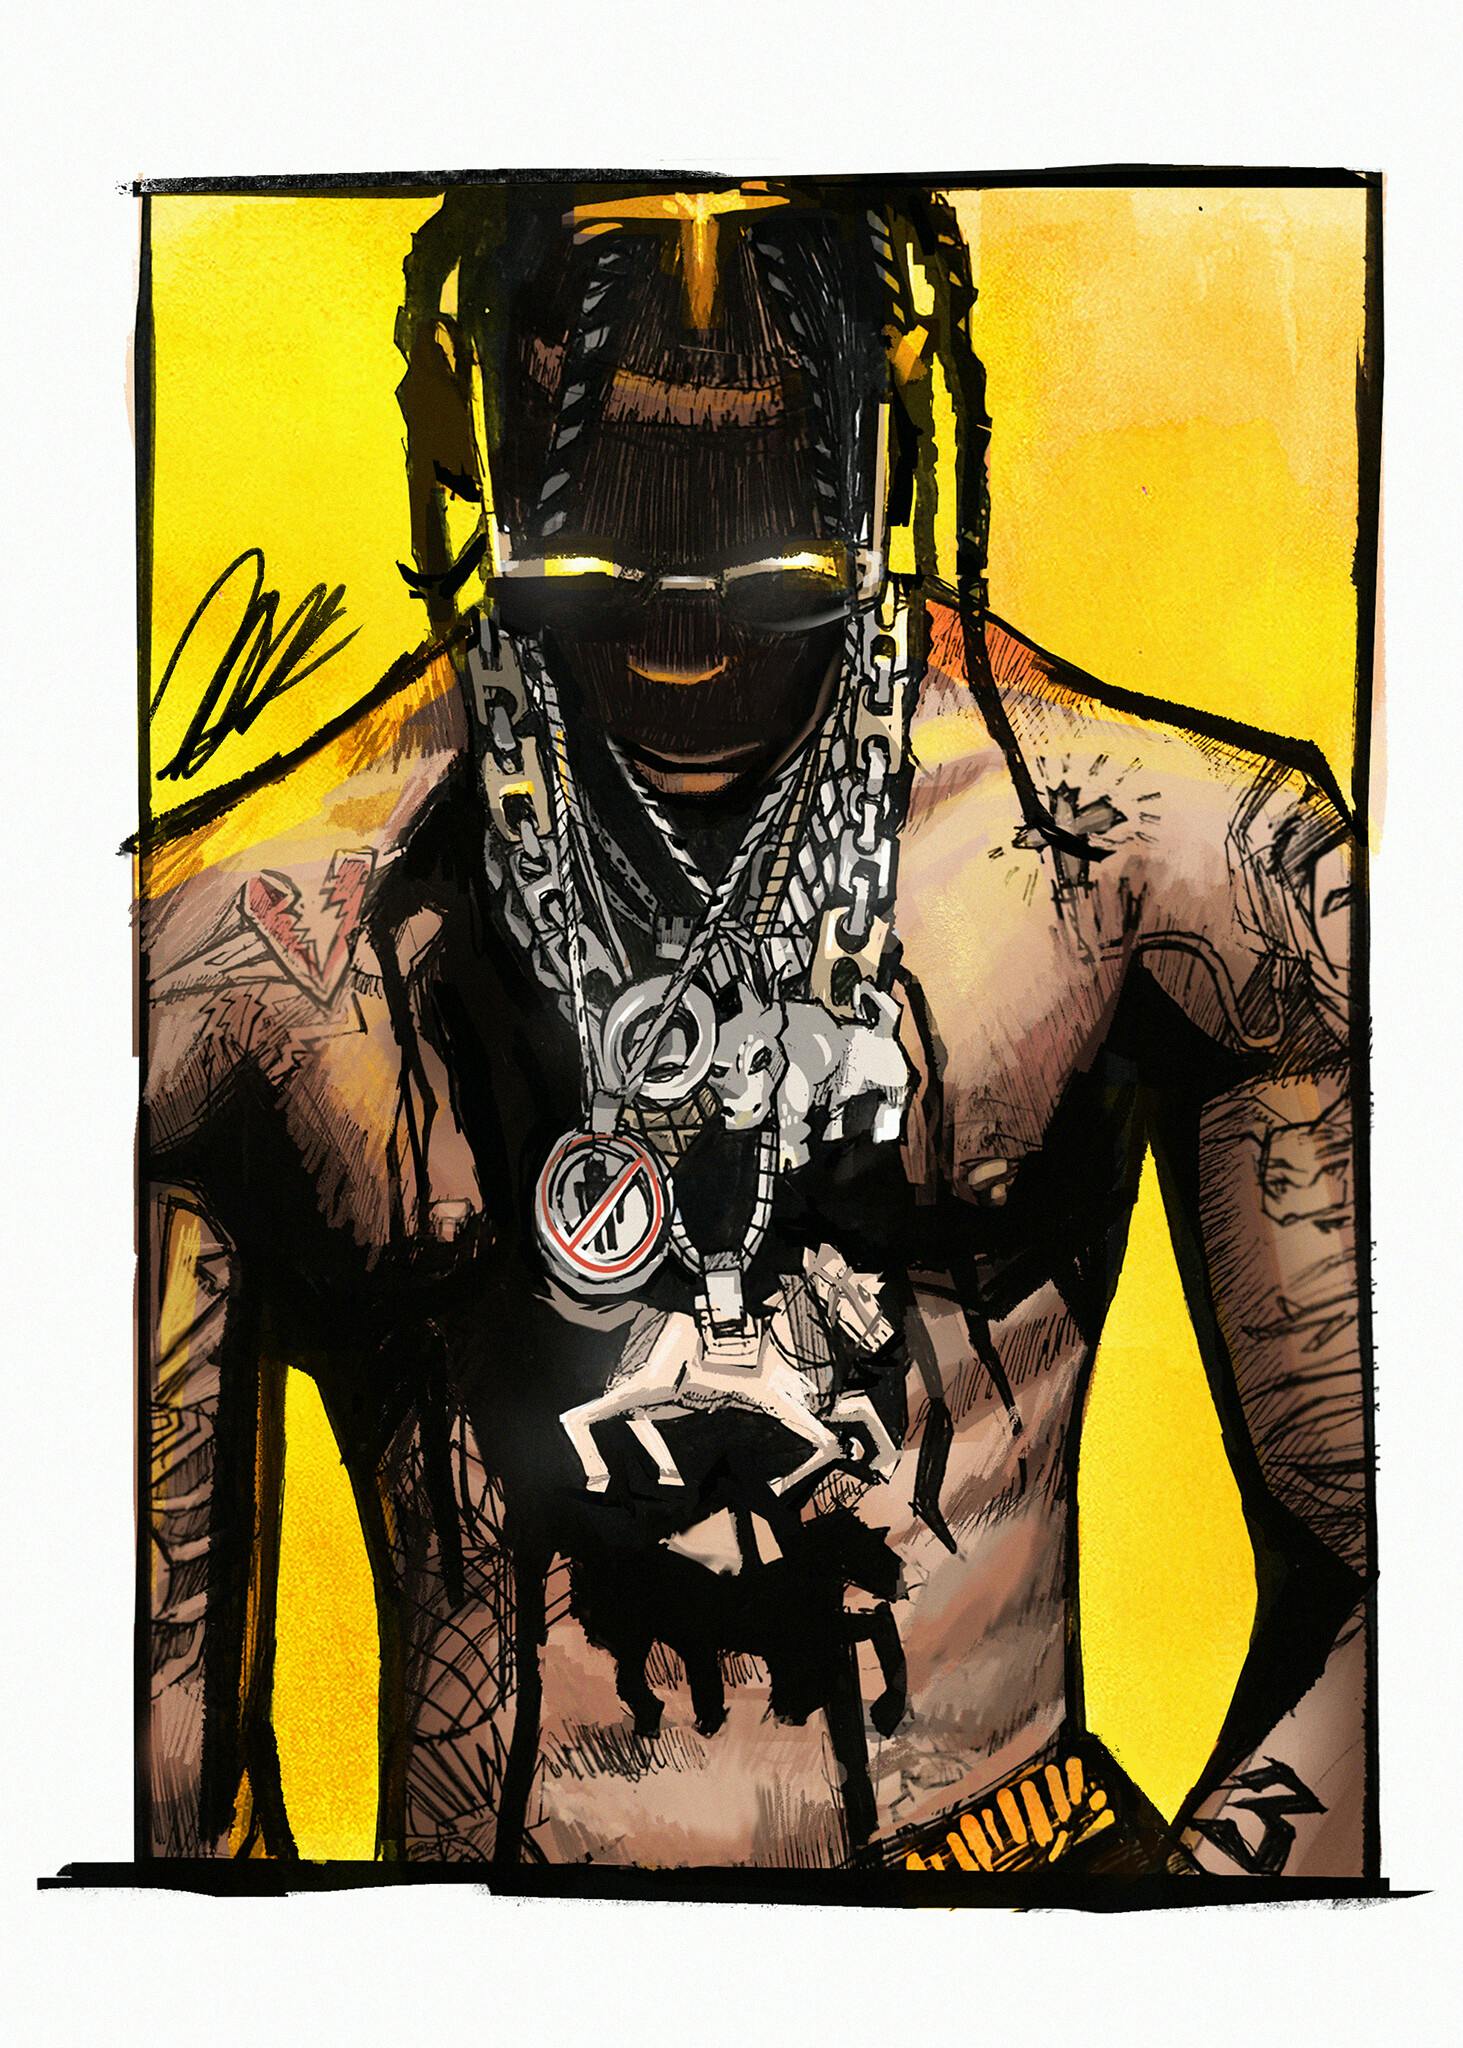 Illustration of a rapper with gold chains